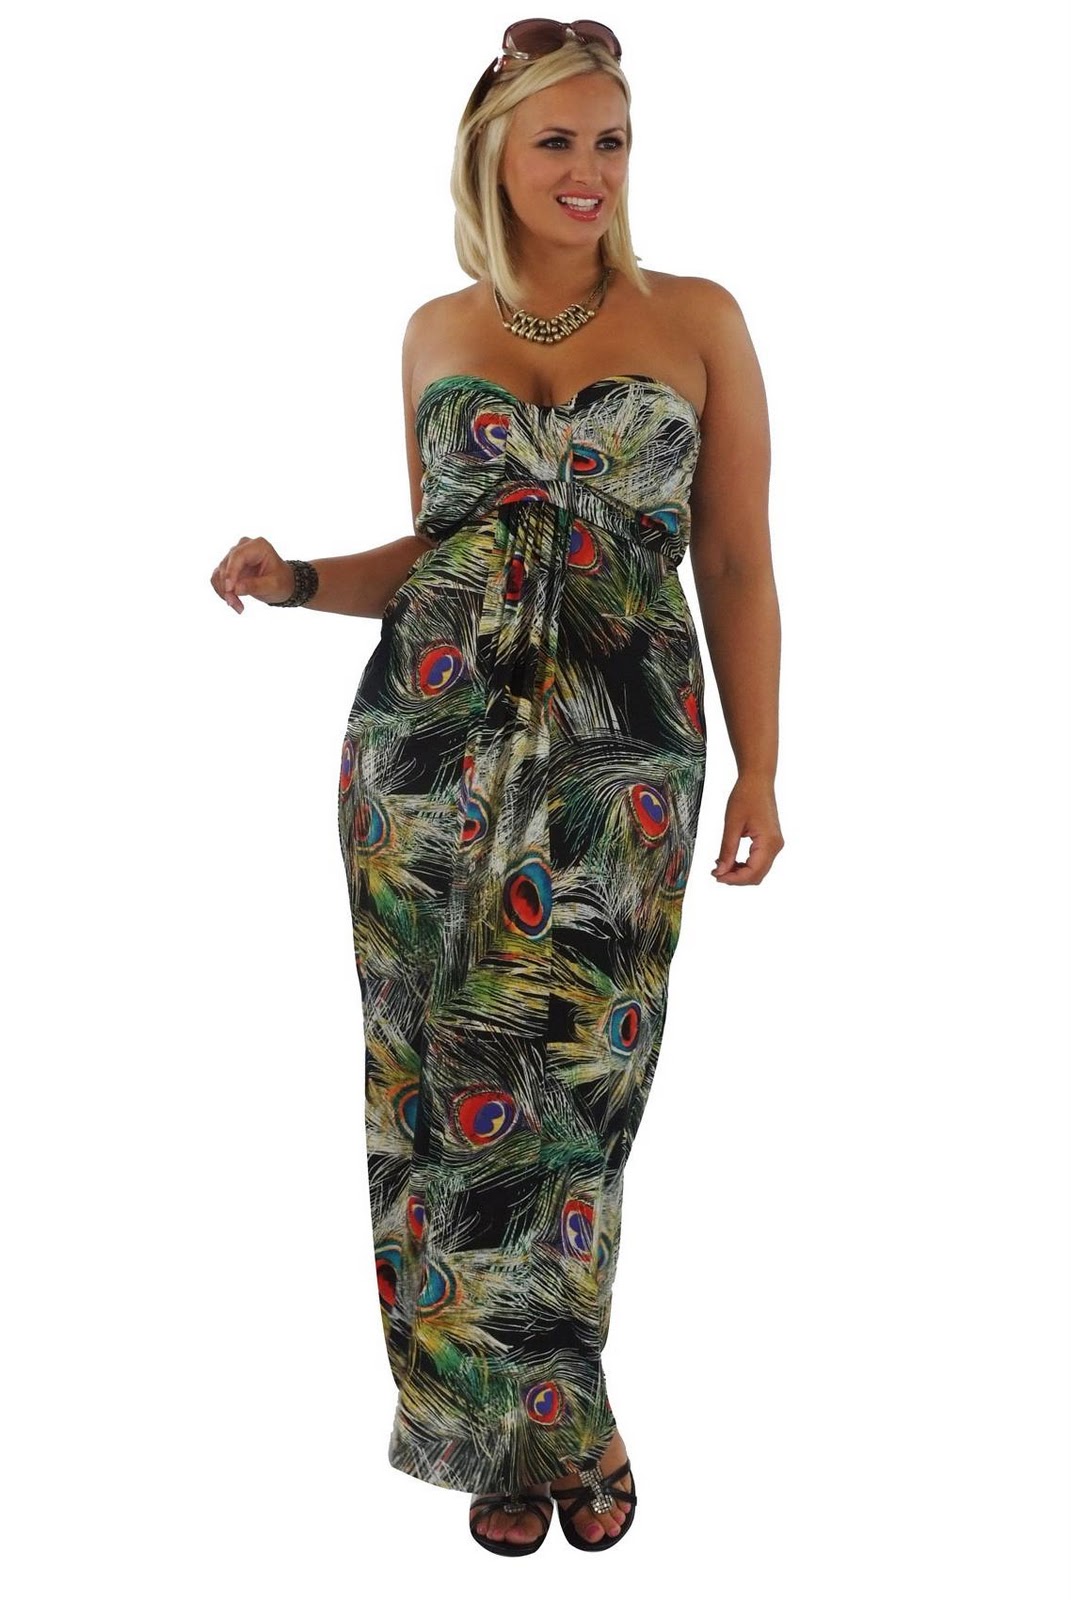 Multi Peacock Feather Print Bandeau Maxi Dress. Rollover image to zoom